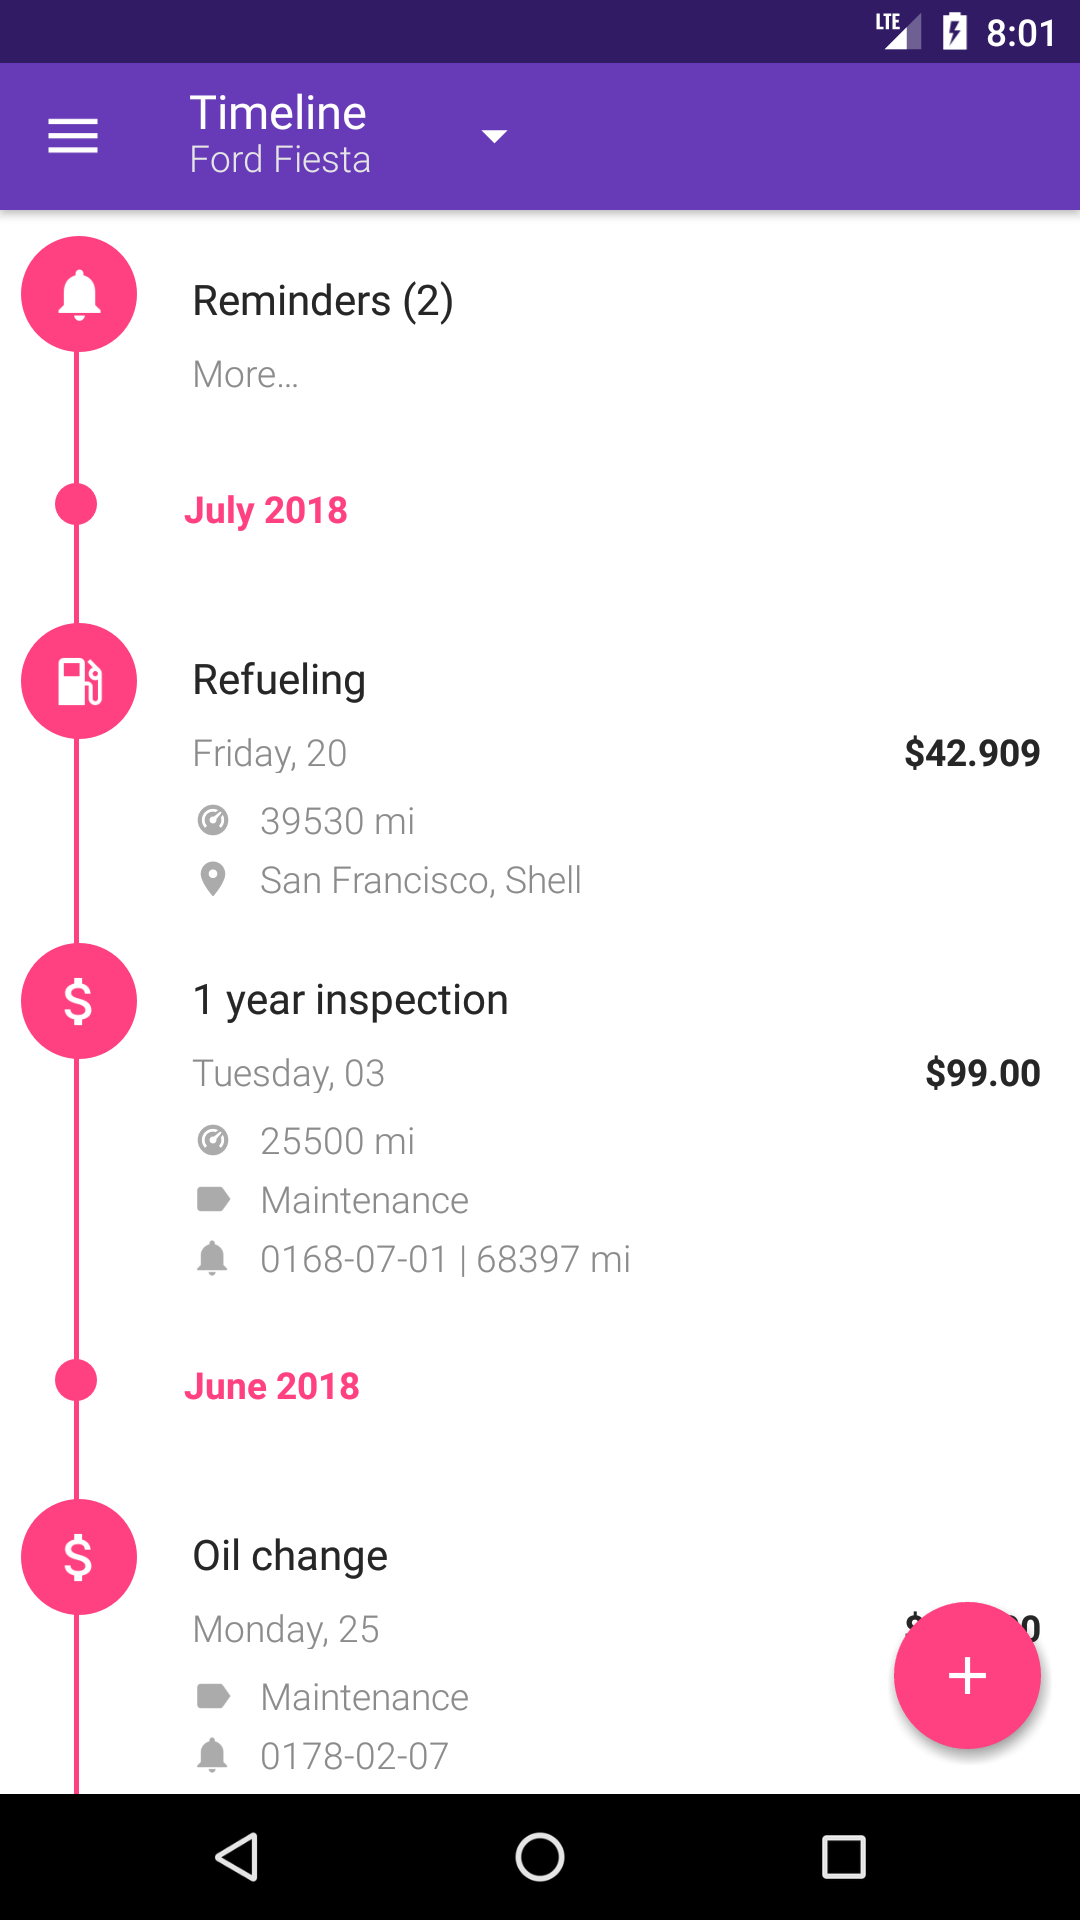 timeline - fuel log and costs